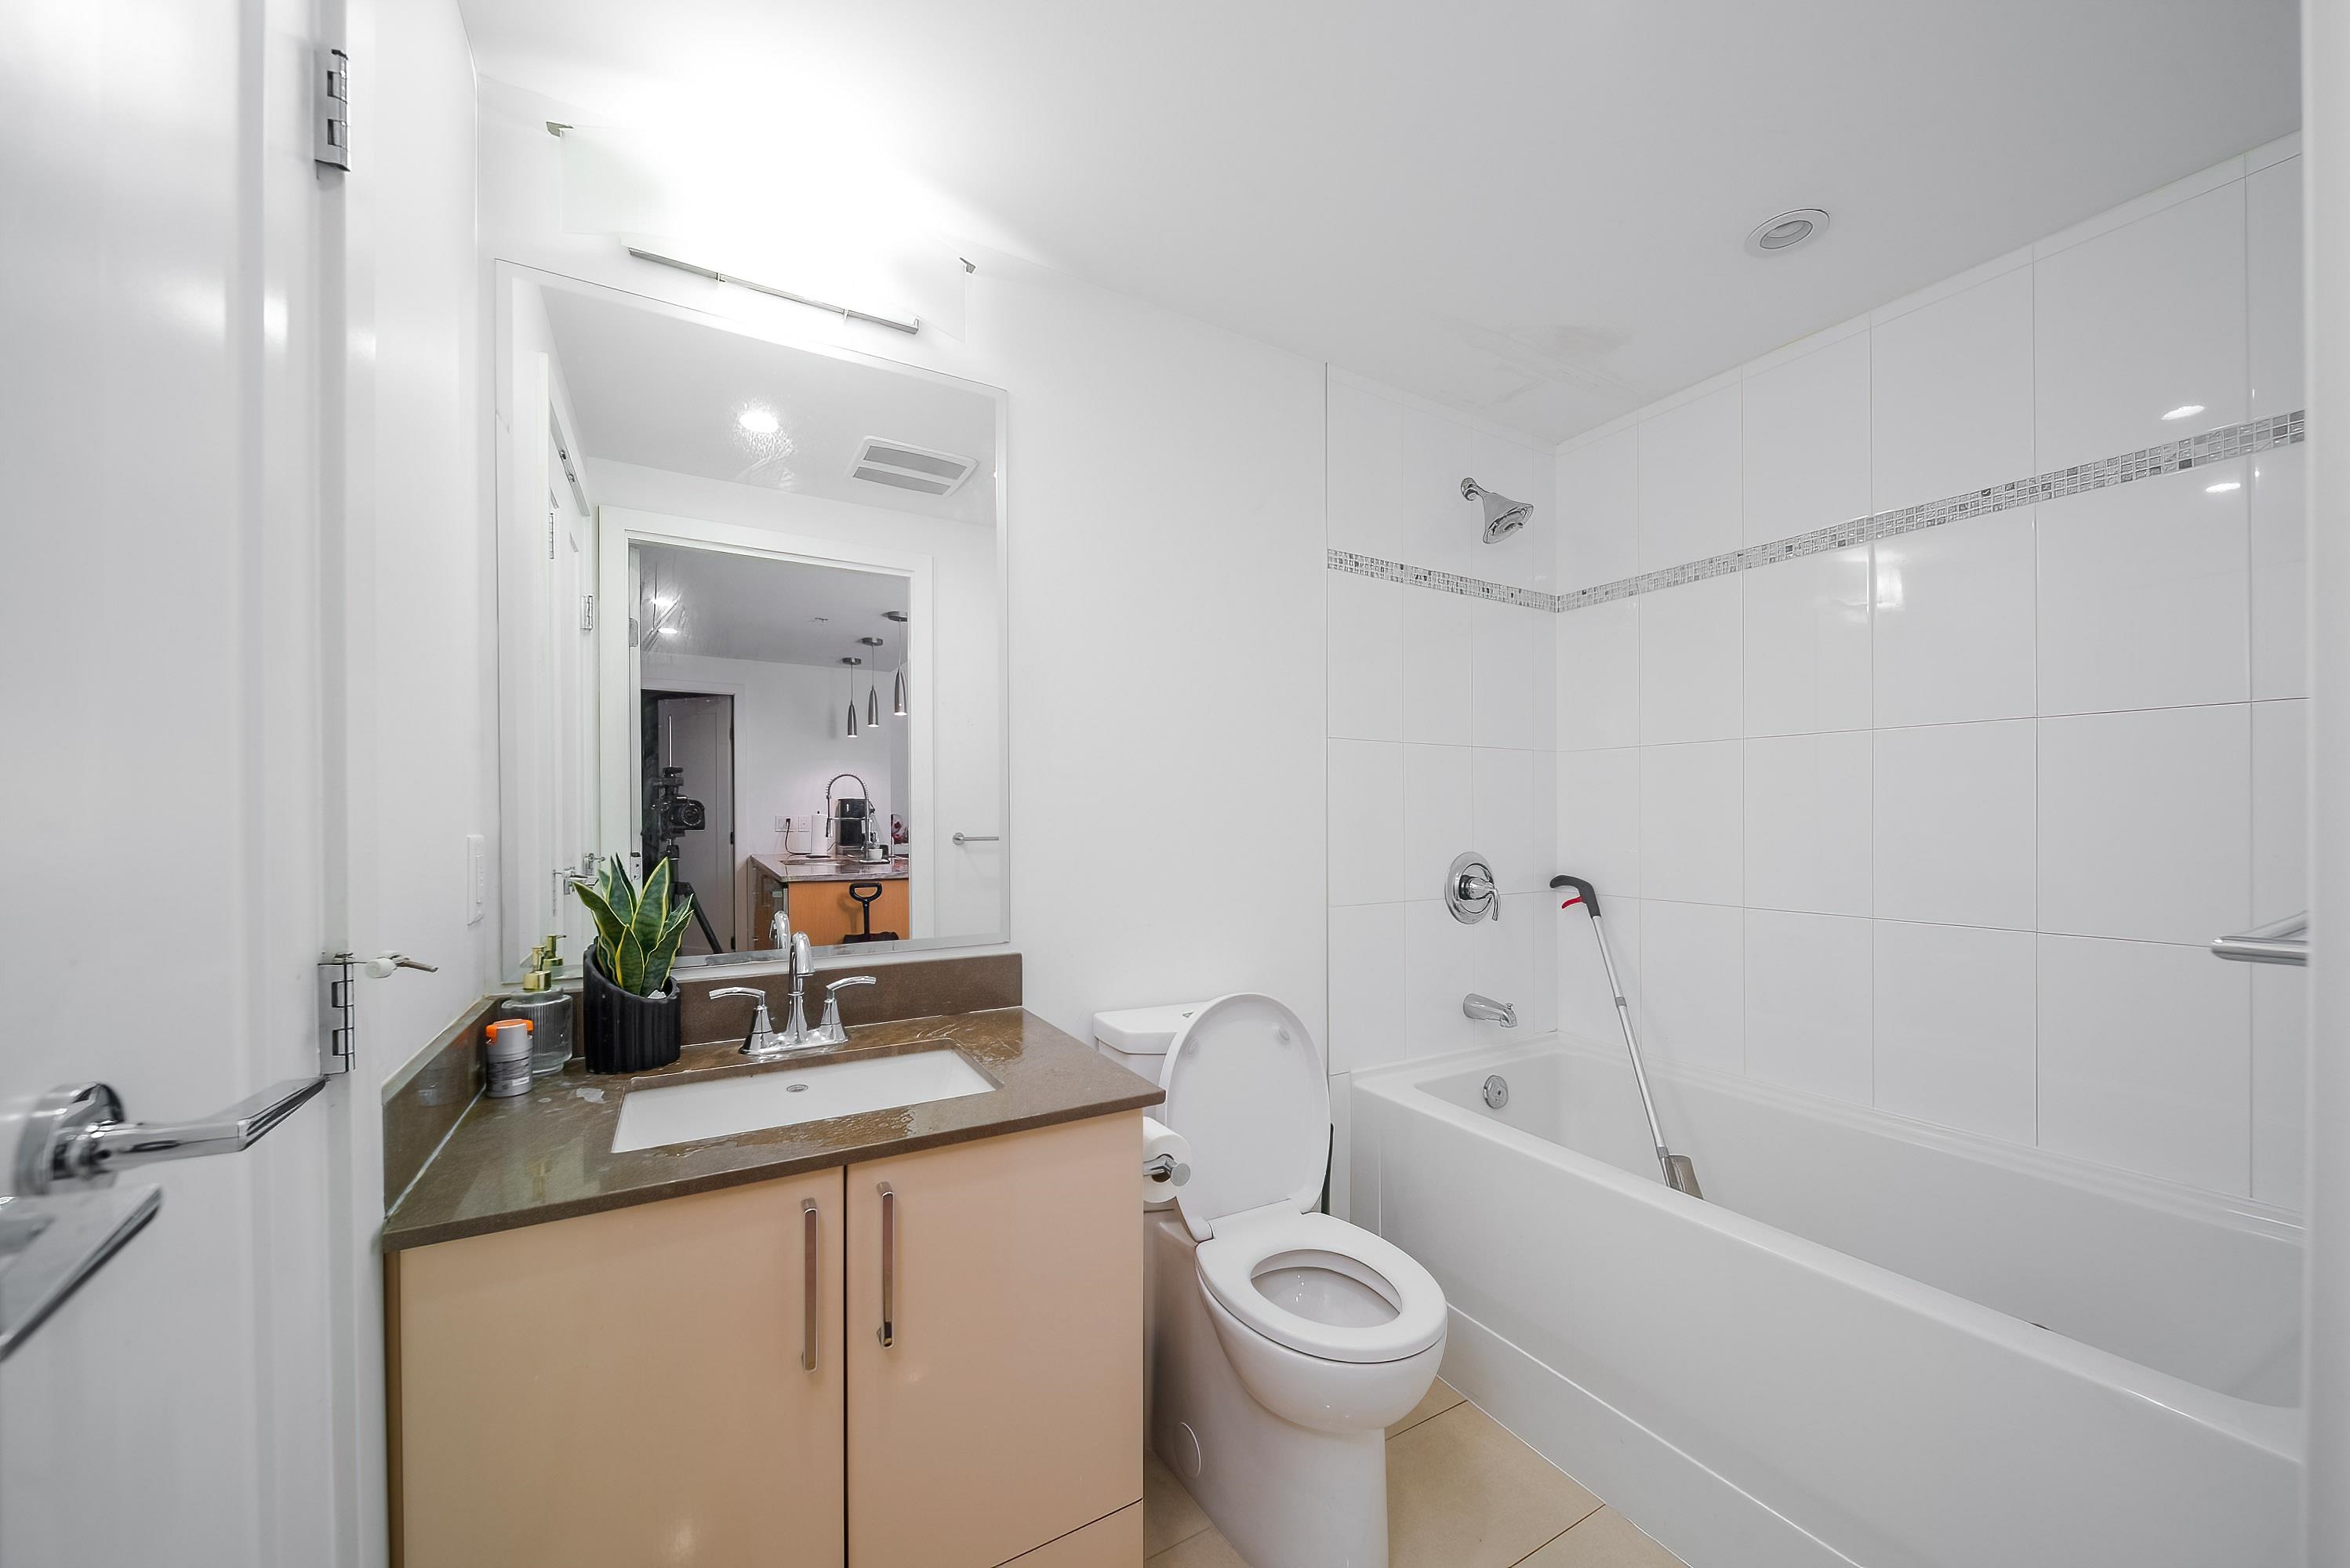 88 1ST, Vancouver, British Columbia V5Y 0K2, 2 Bedrooms Bedrooms, ,2 BathroomsBathrooms,Residential Attached,For Sale,1ST,R2871705